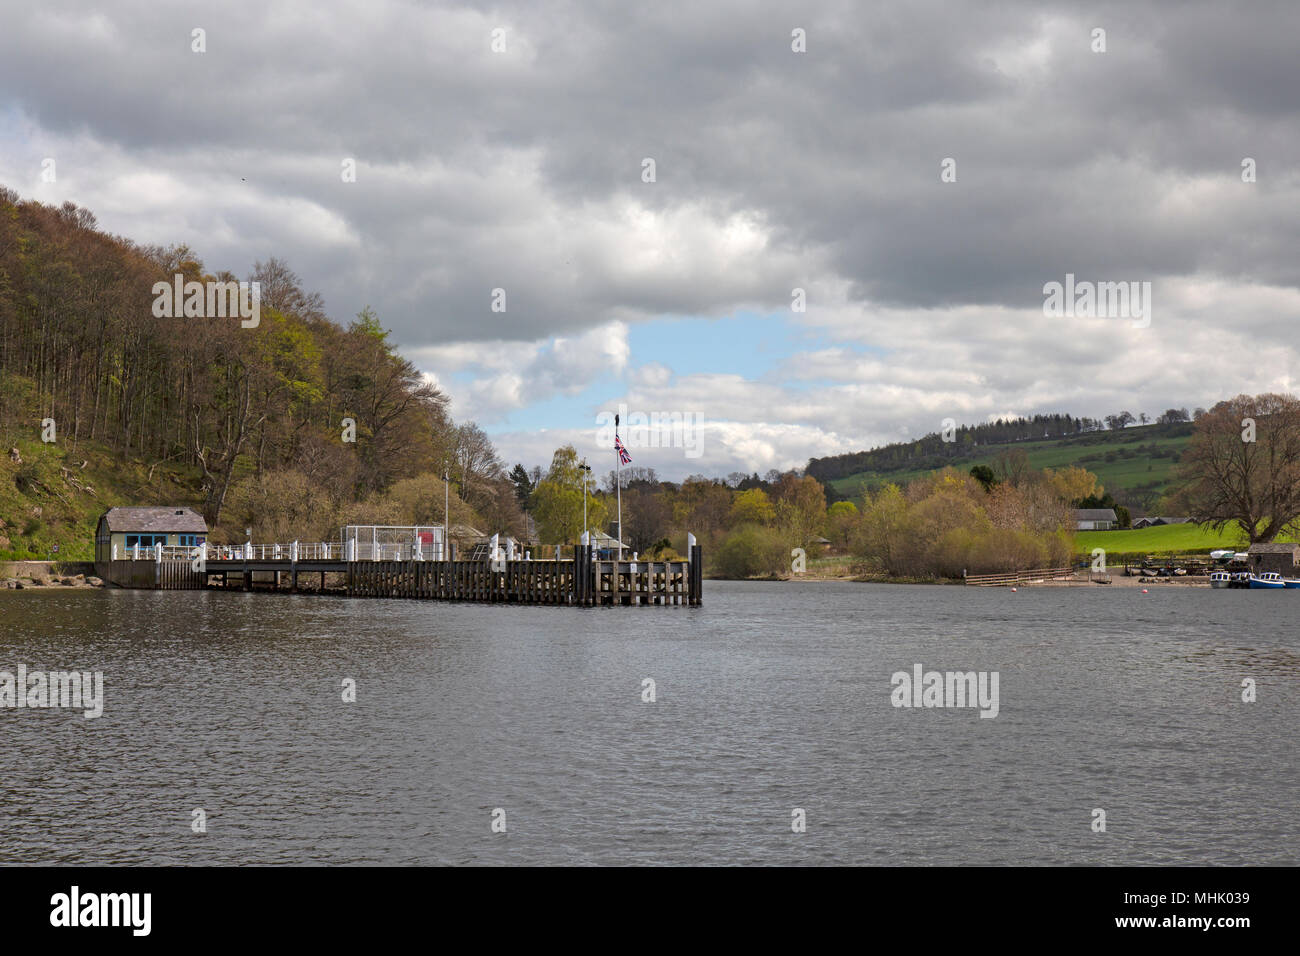 The jetty, or Pier, at Pooley Bridge on Ullswater, one of the lakes in the Lake District National Park in England. Ullswater steamers stop here. Stock Photo